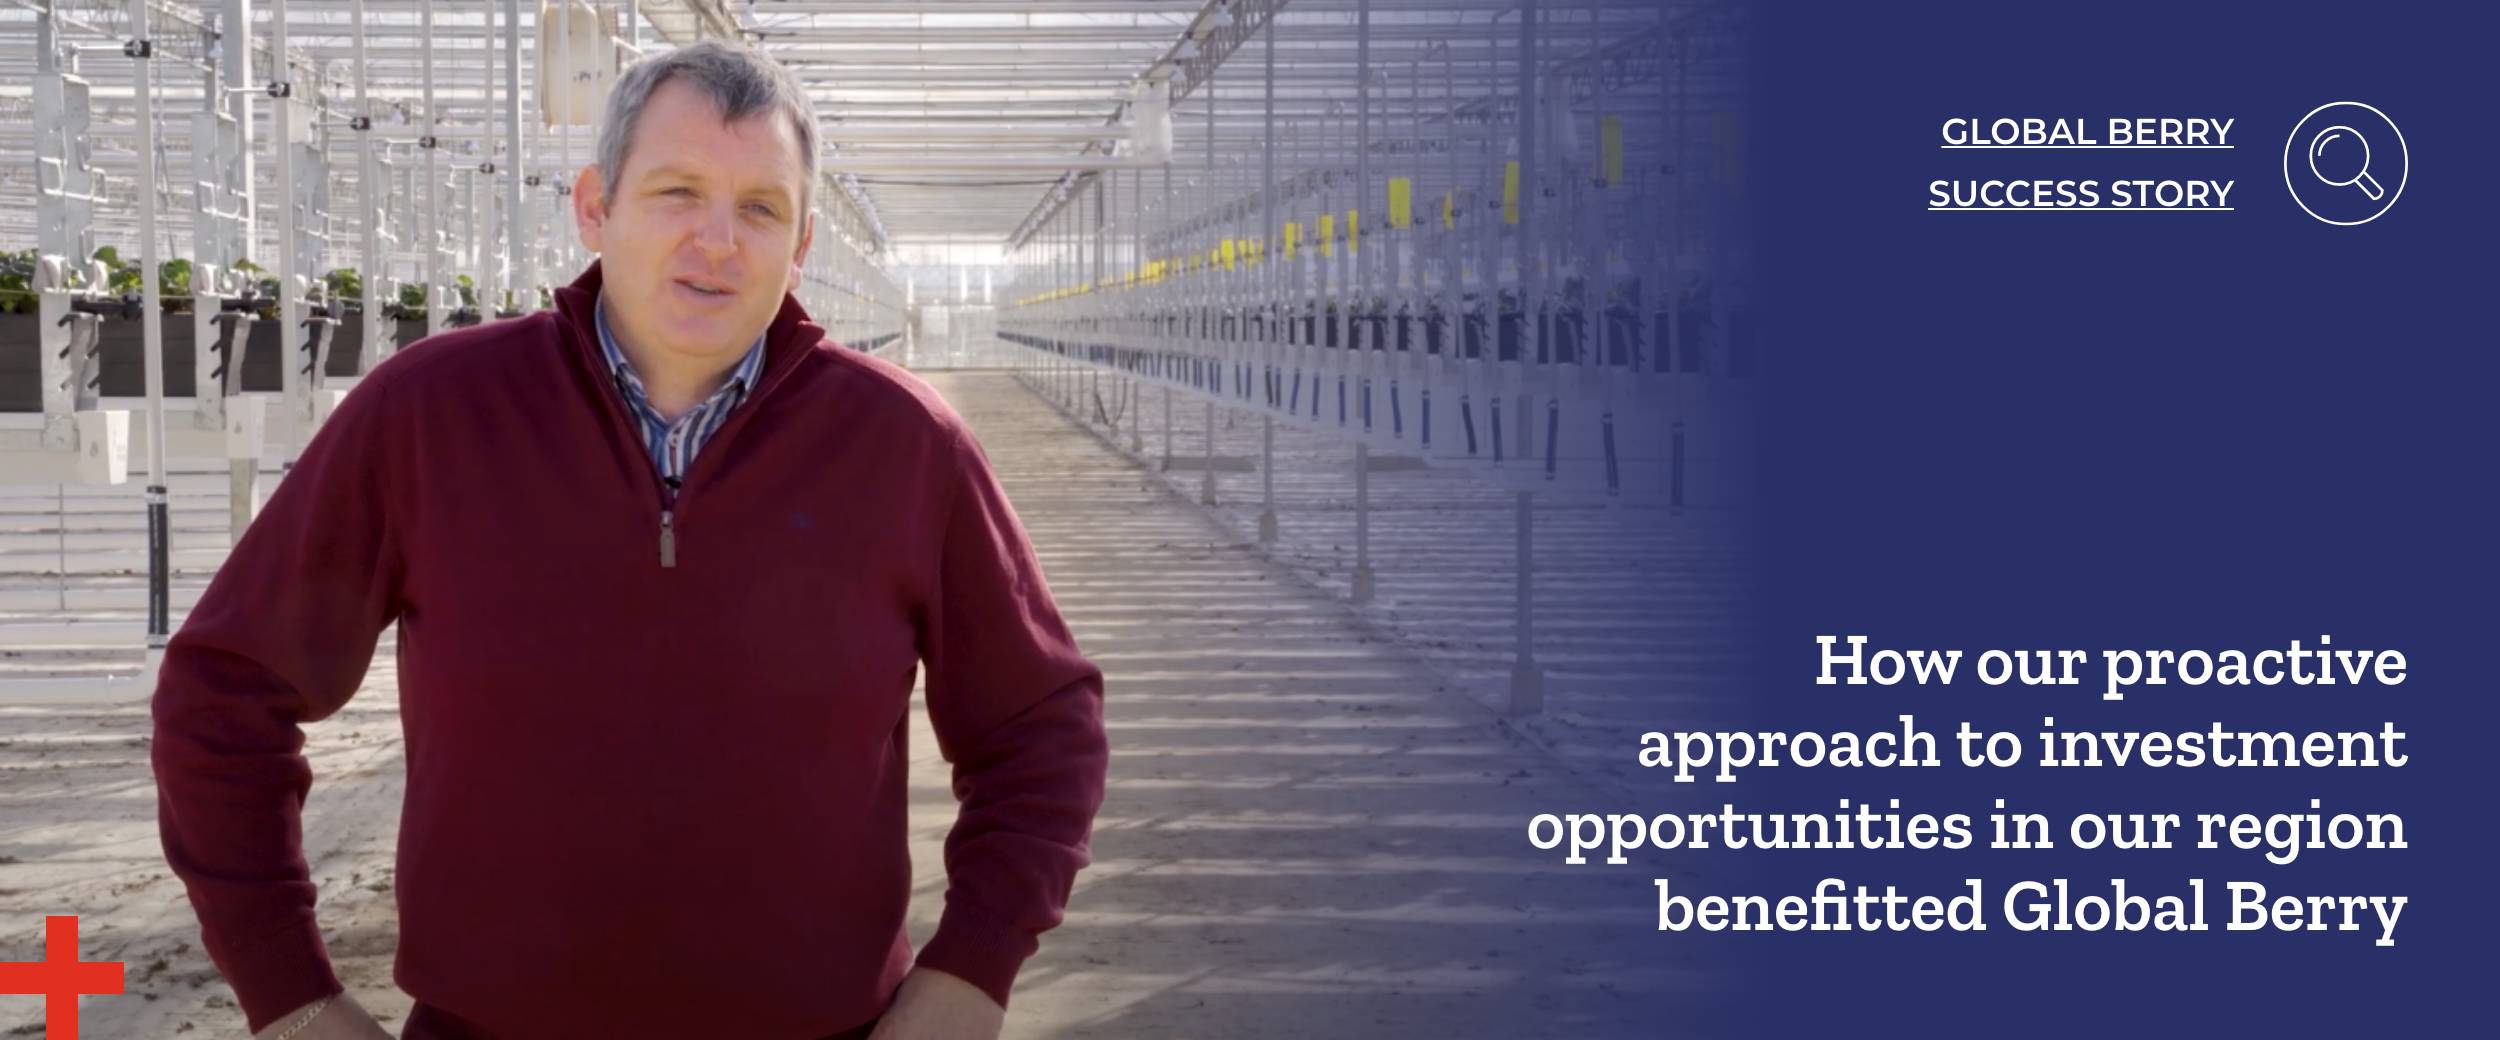 How our proactive approach to investment opportunities in our region benefitted Global Berry